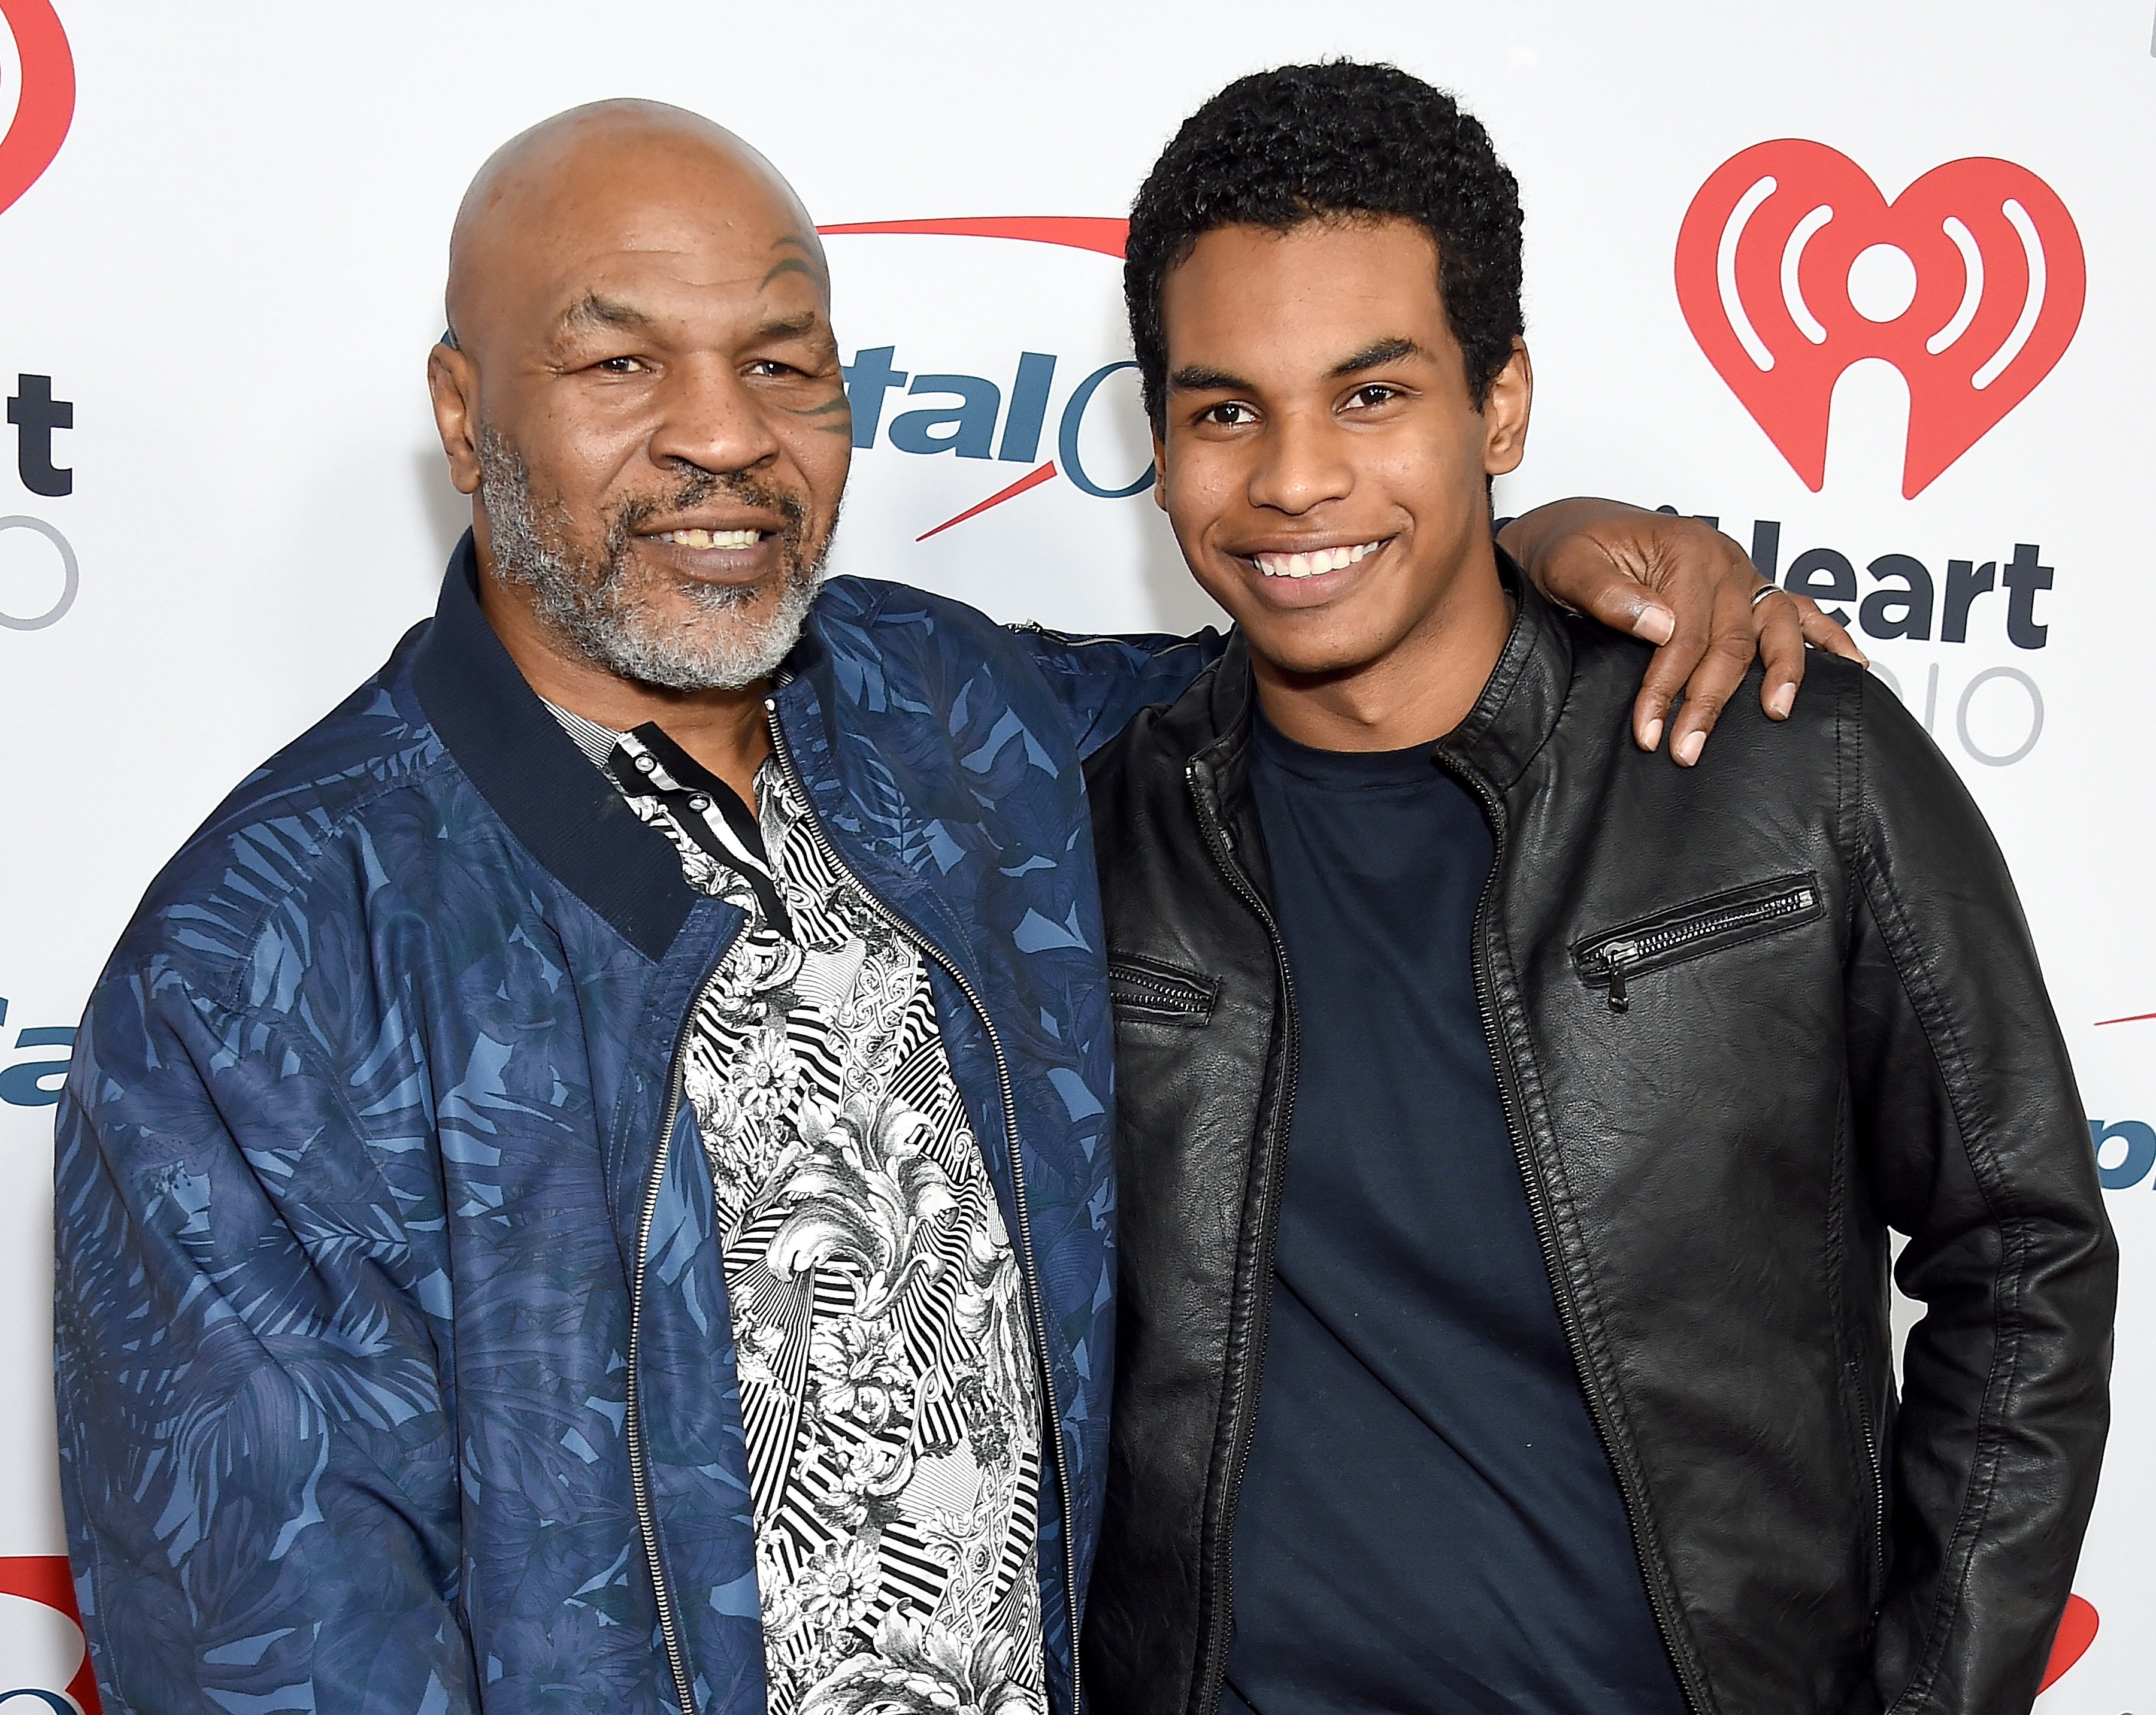 Mike Tyson and Miguel Leon Tyson at the iHeartRadio Theater on January 18, 2019 in Burbank, California.  |  Source: Getty Images